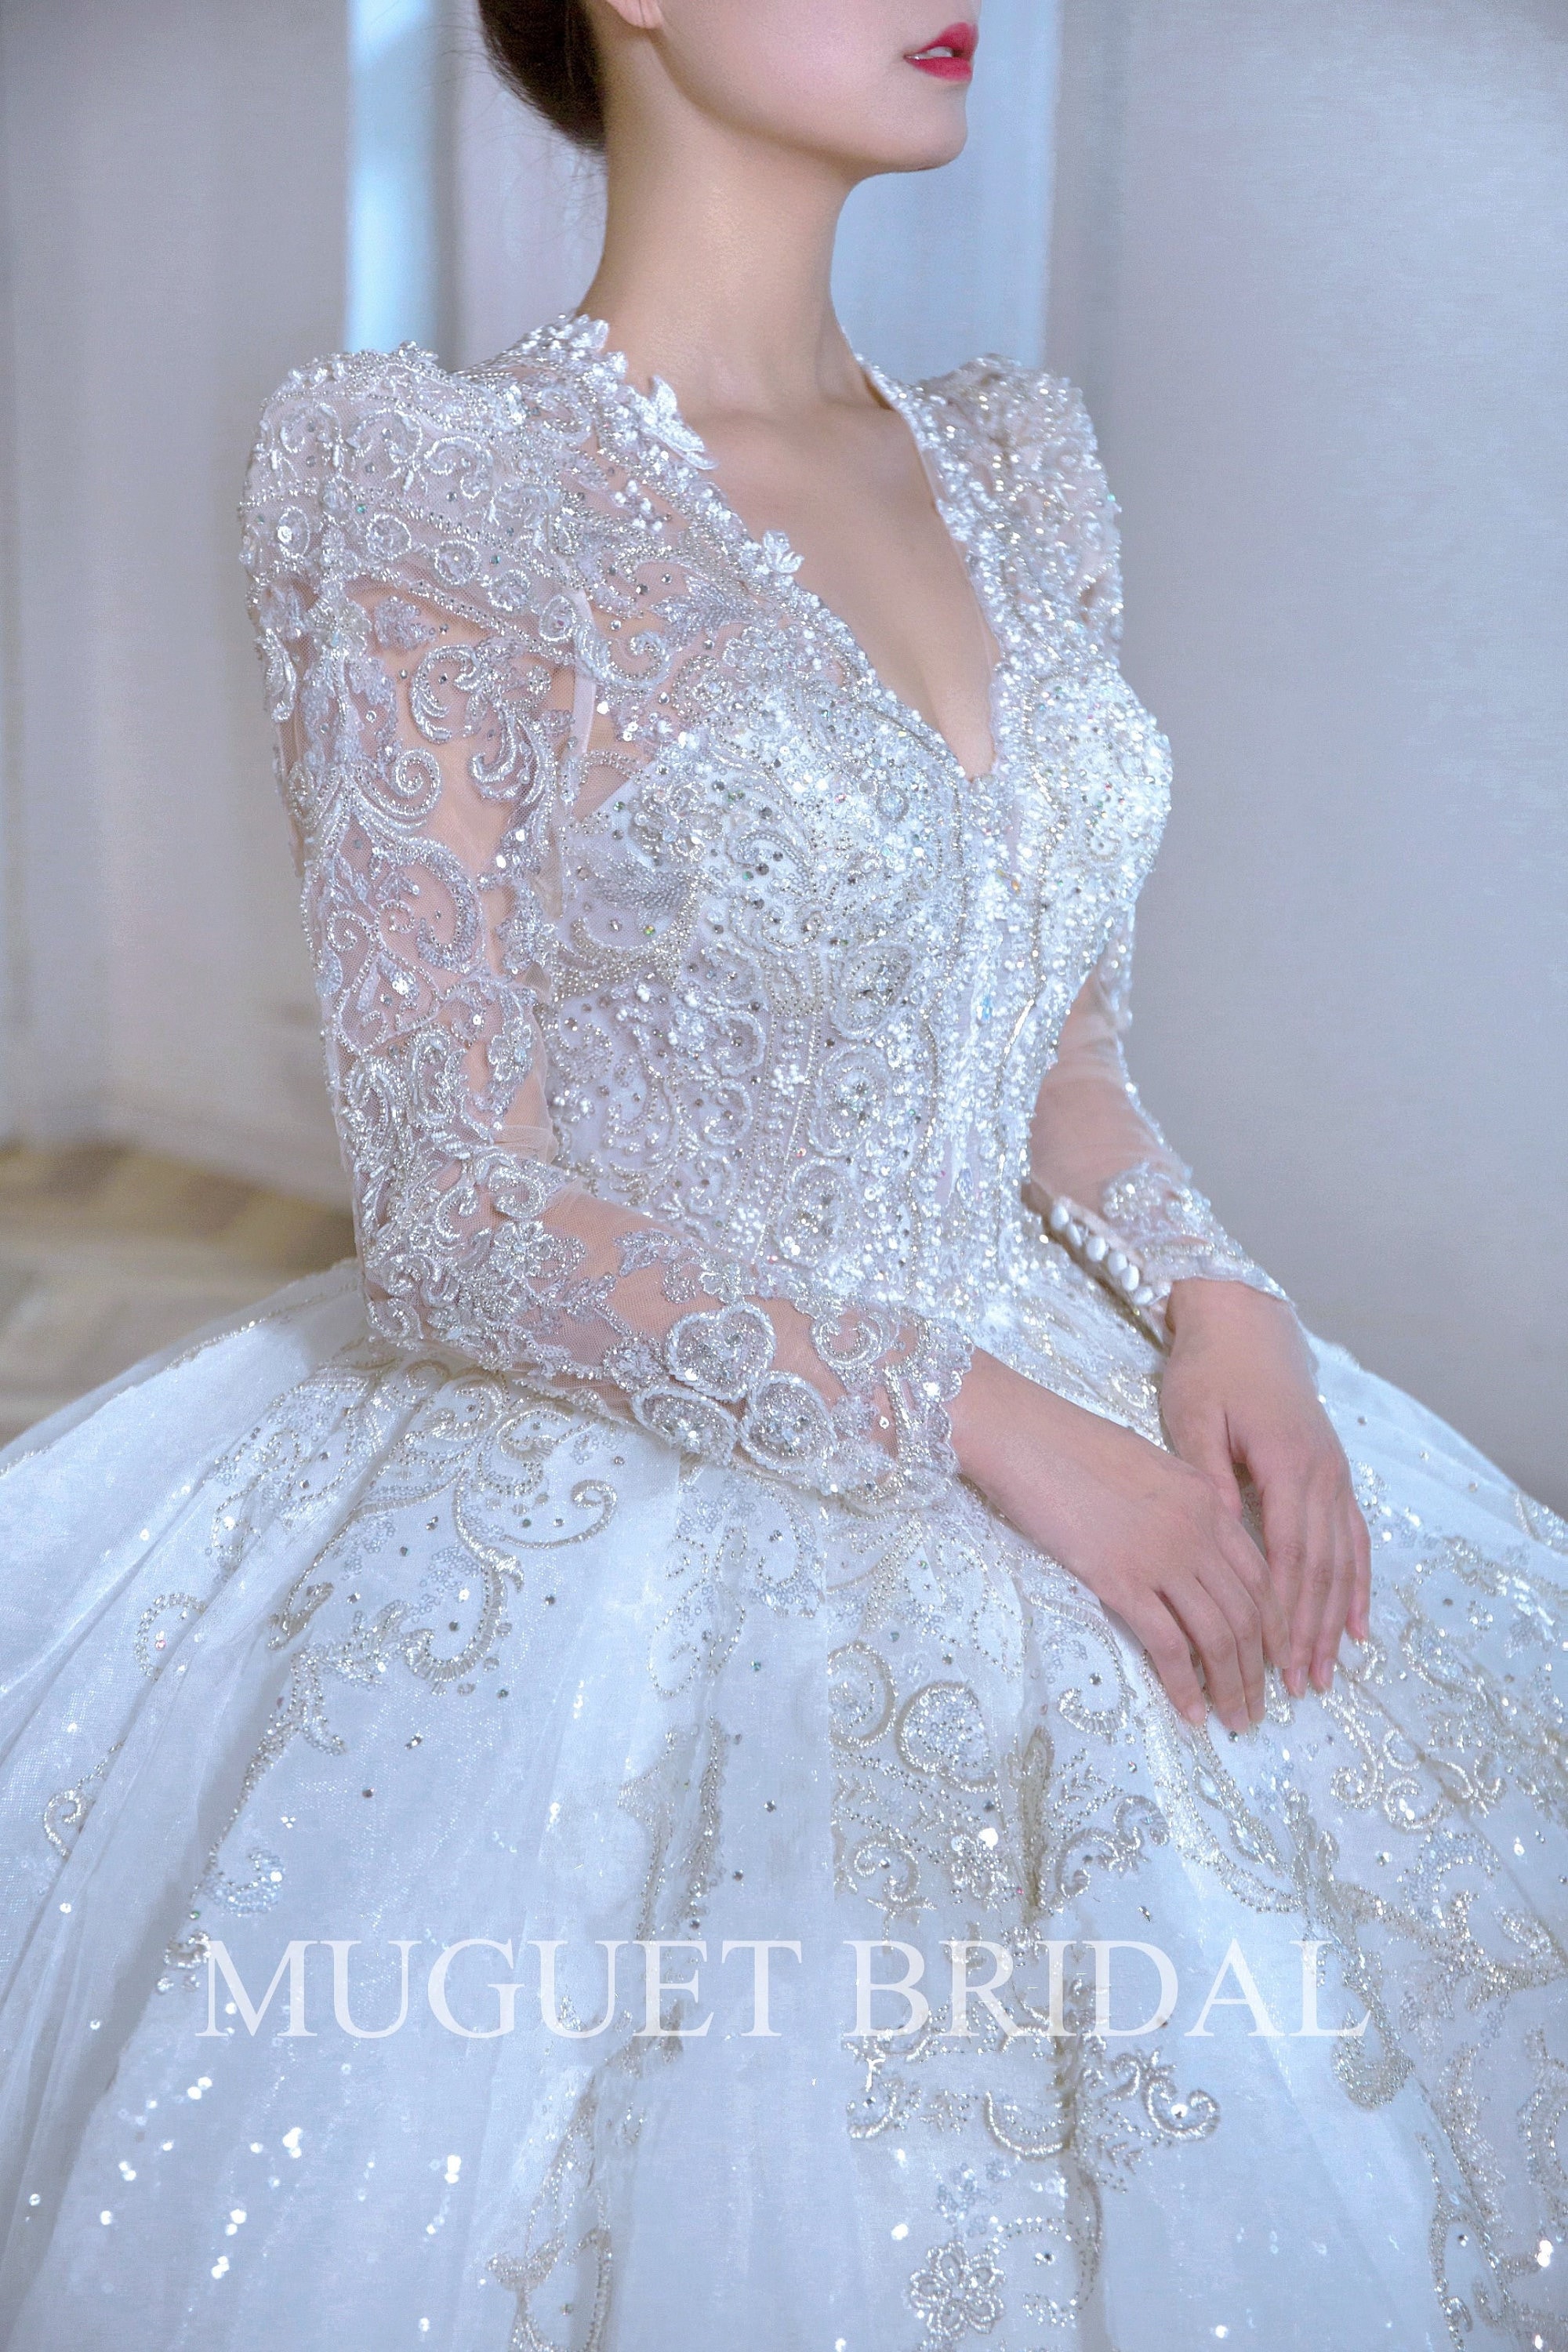 Luxurious Arabic Crystal Sequin Diamante Mermaid Wedding Dress With Beaded  Details Customizable Plus Size Bridal Gown From Dresstop, $286.36 |  DHgate.Com